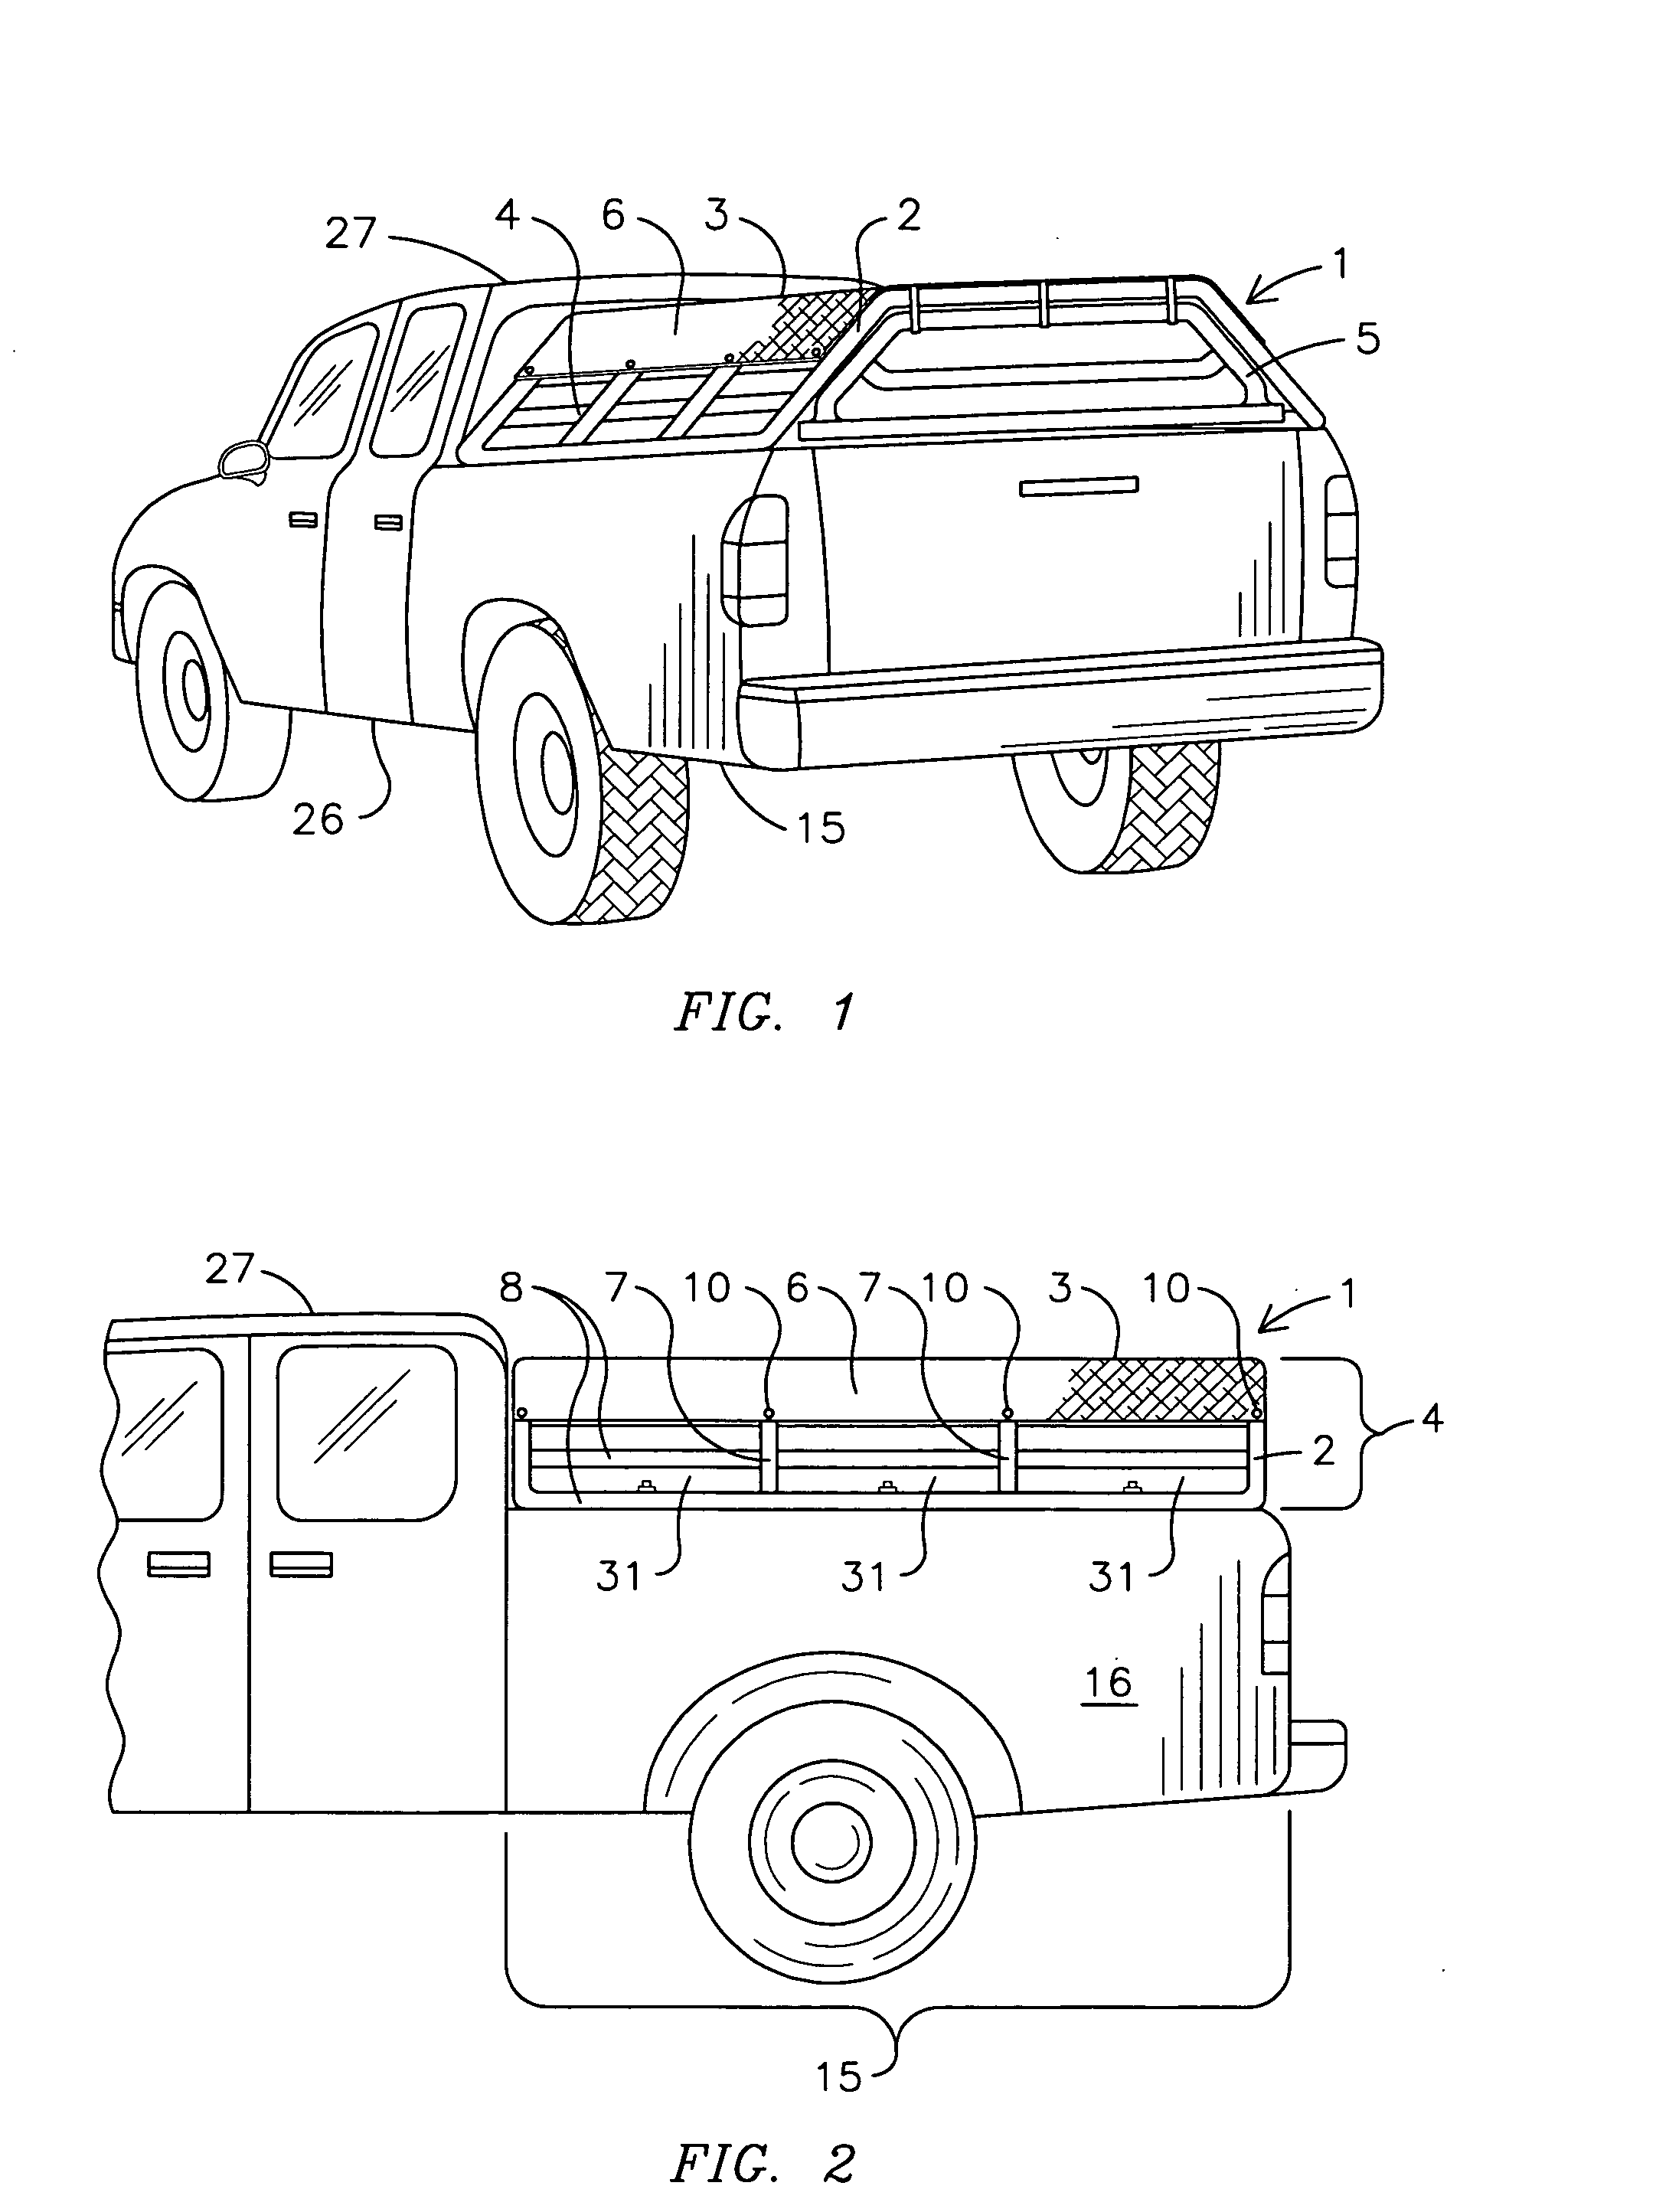 Truck bed animal enclosure device